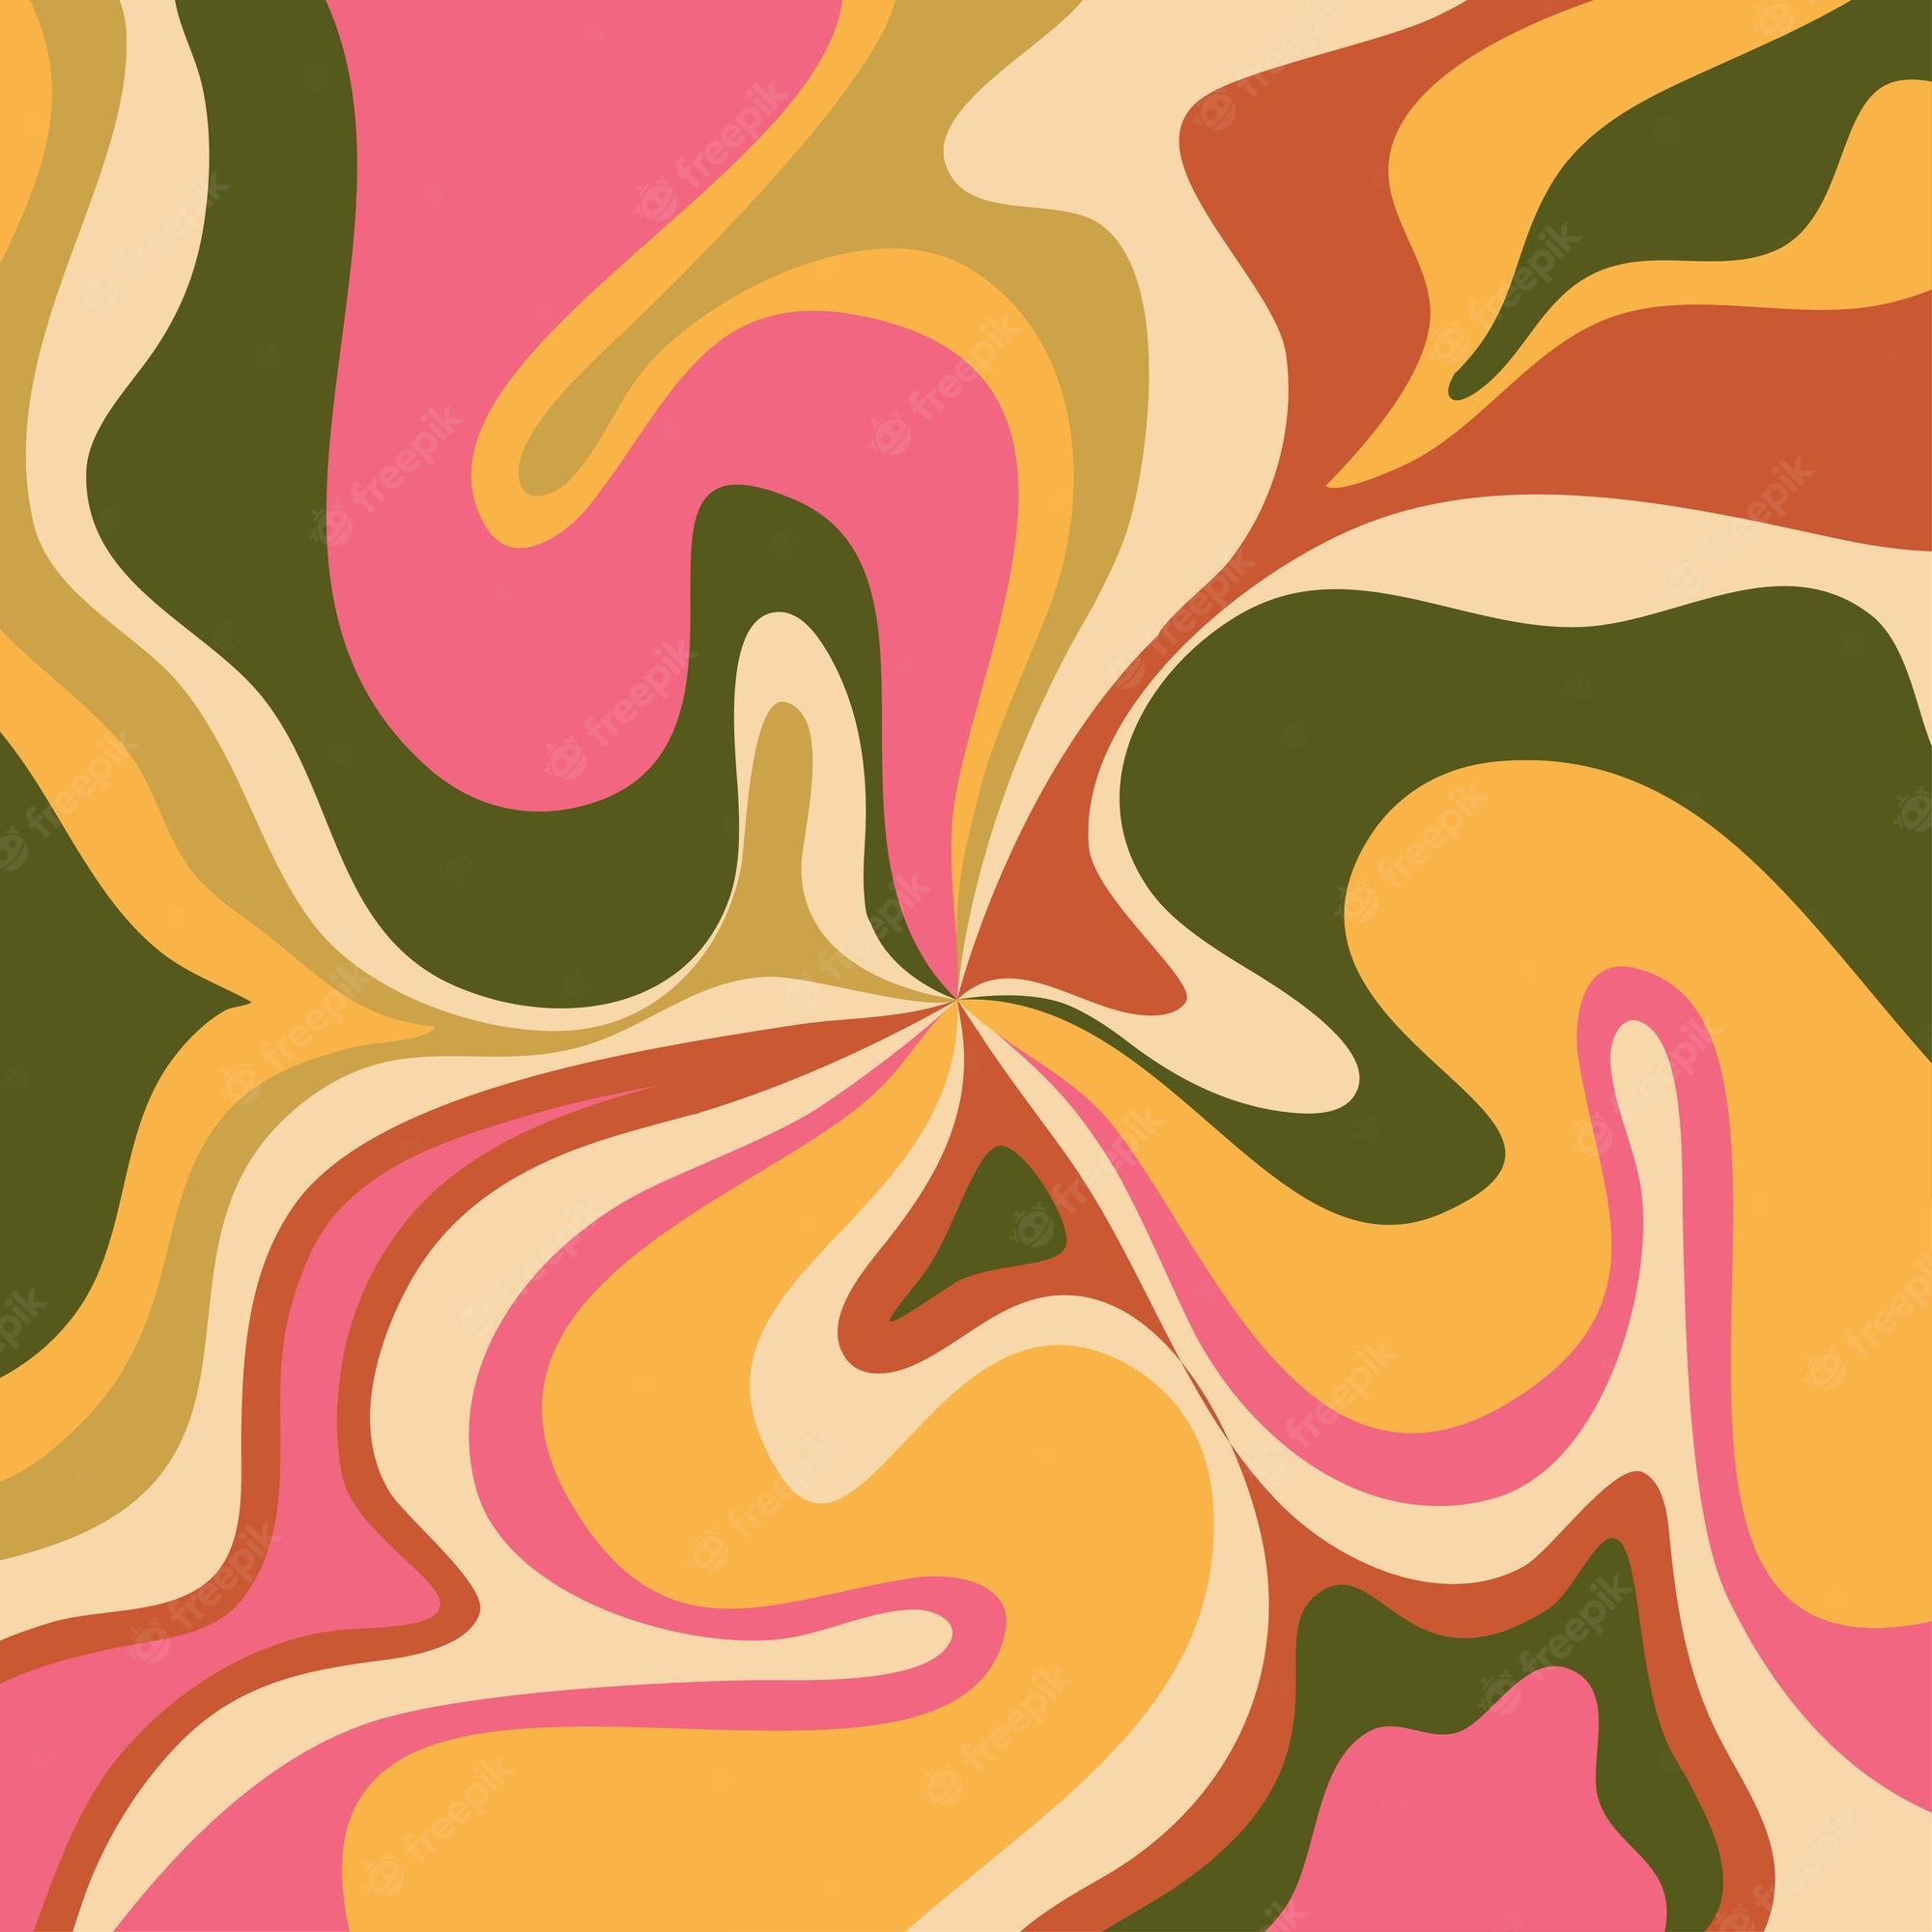 Psychedelic Groovy Background Image